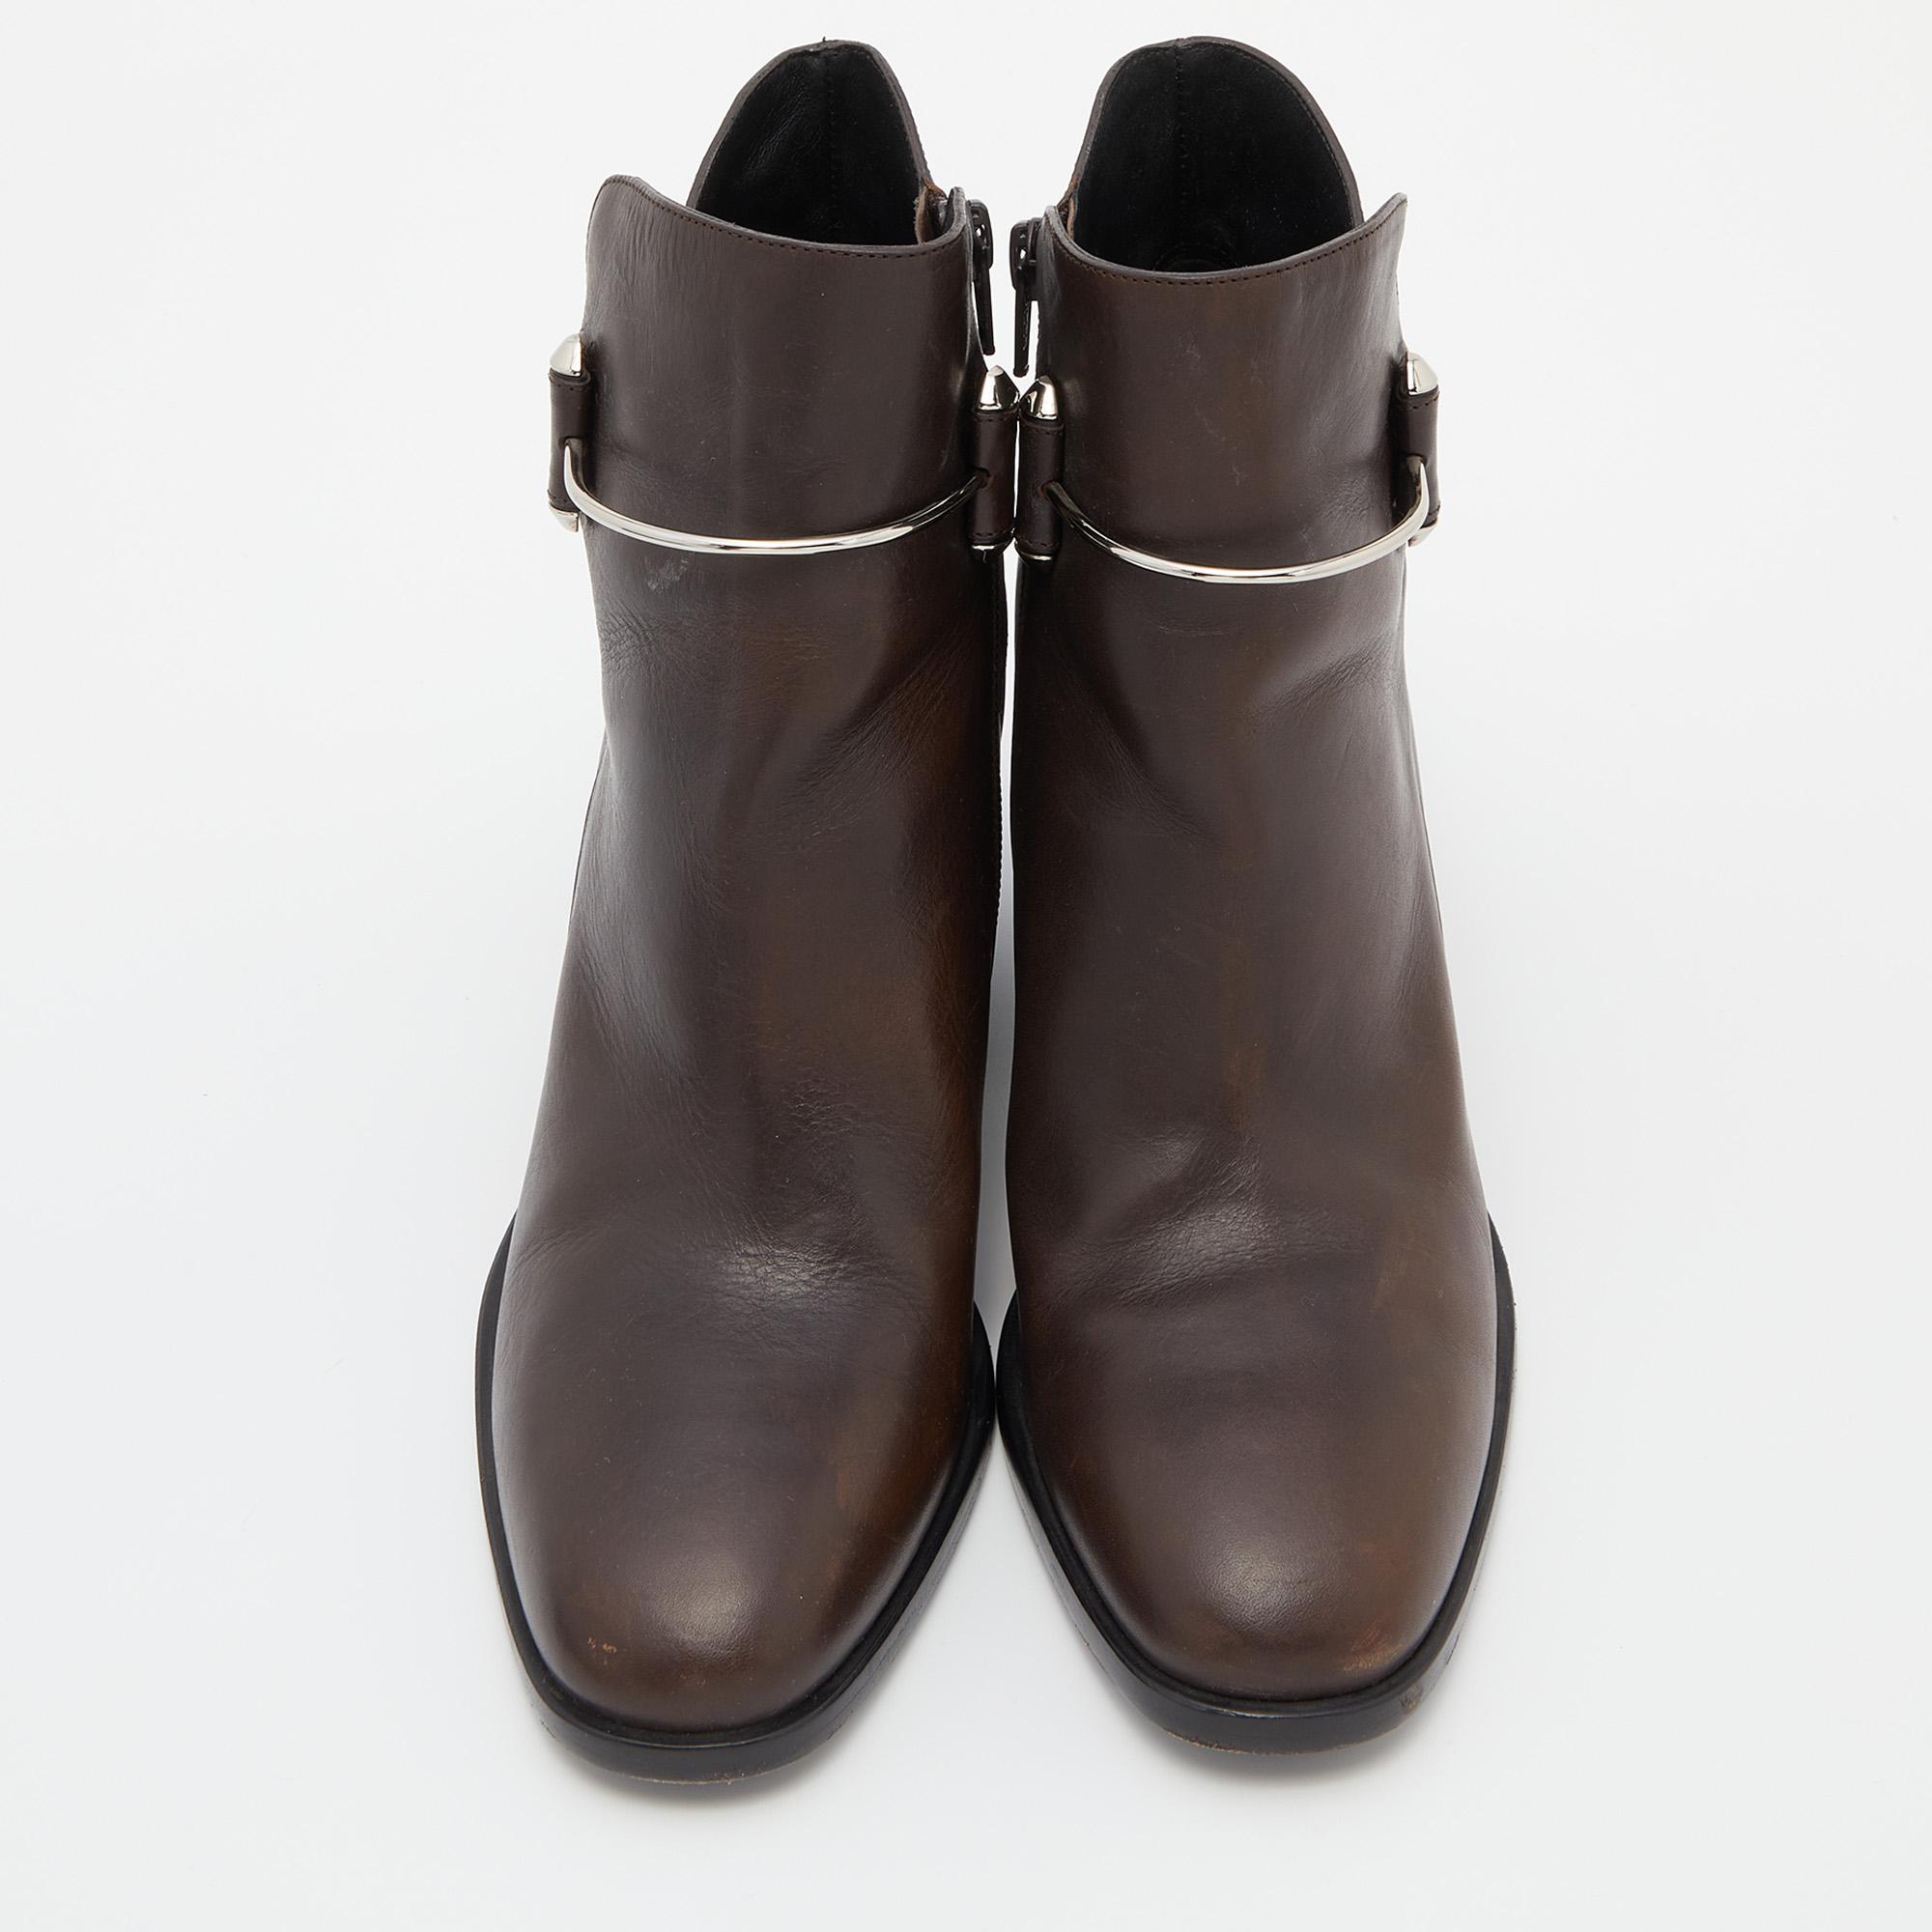 Balenciaga Brown Leather Ankle Boots Size 40